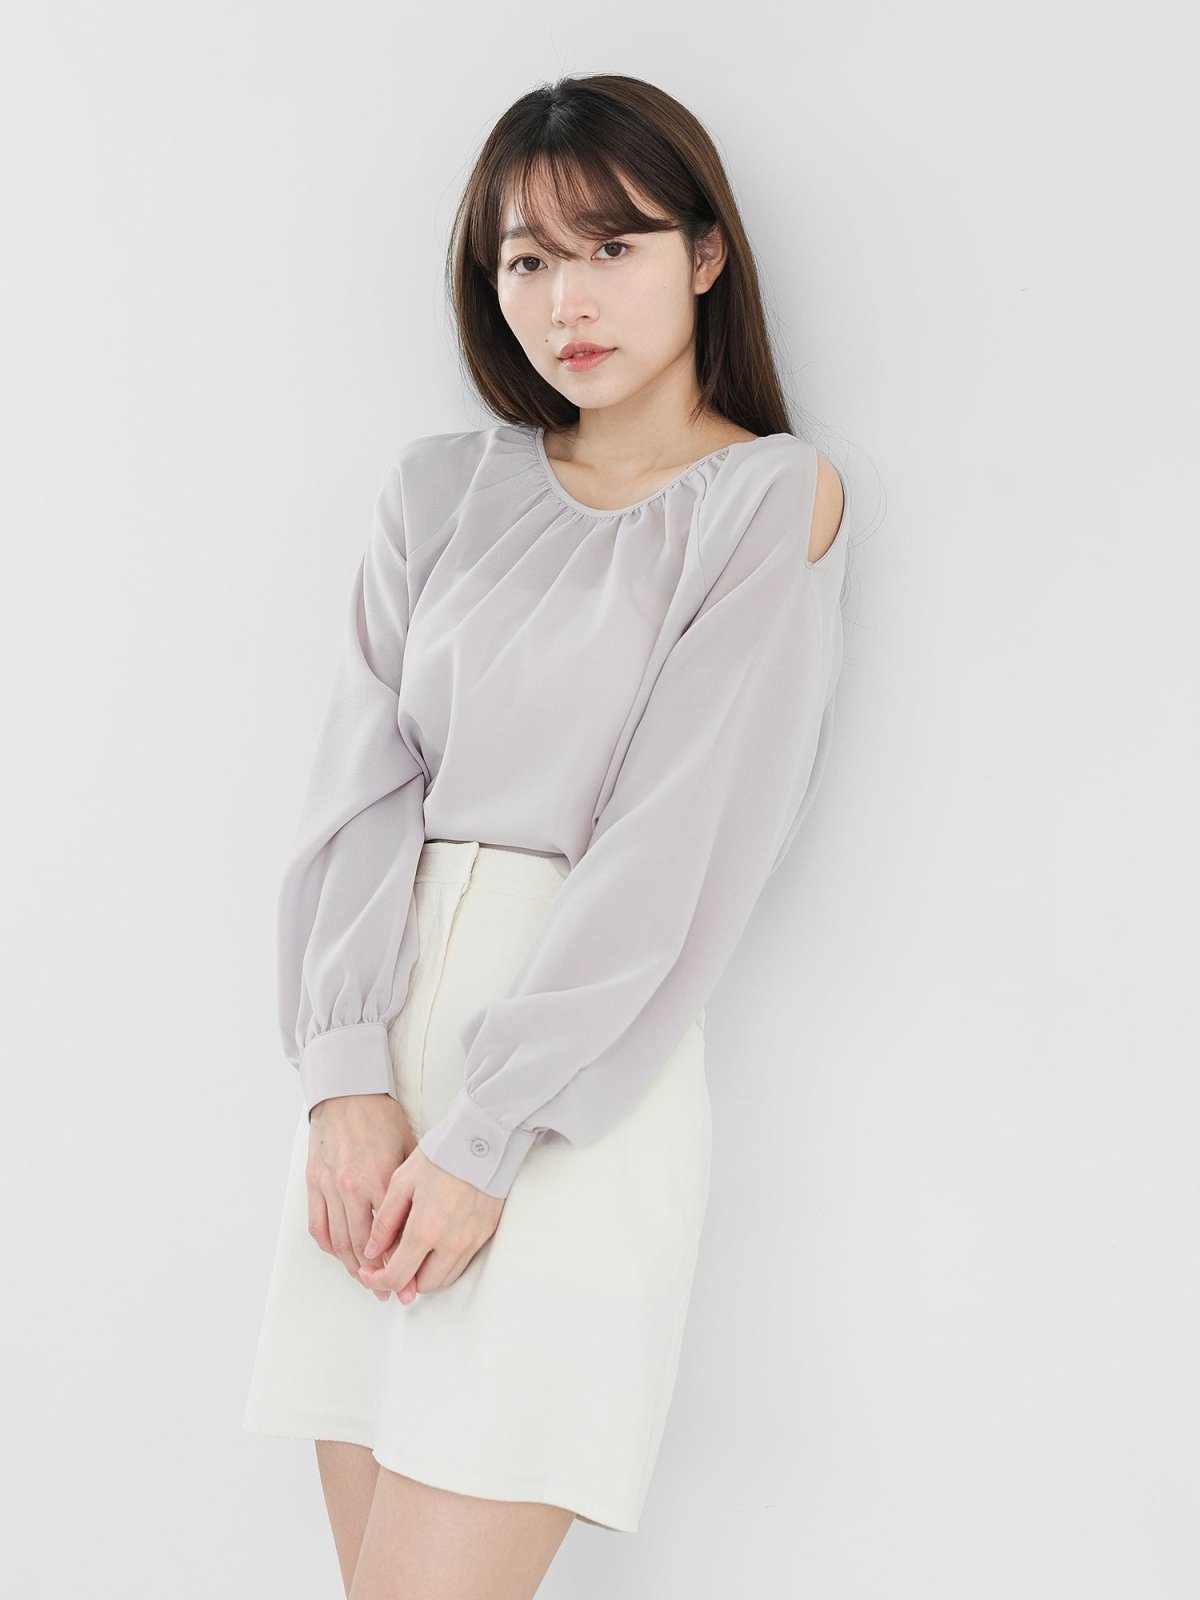 Lydia Cold Shoulder Top - DAG-DD1256-23LilacGrayS - Lilac Gray - S - D'zage Designs